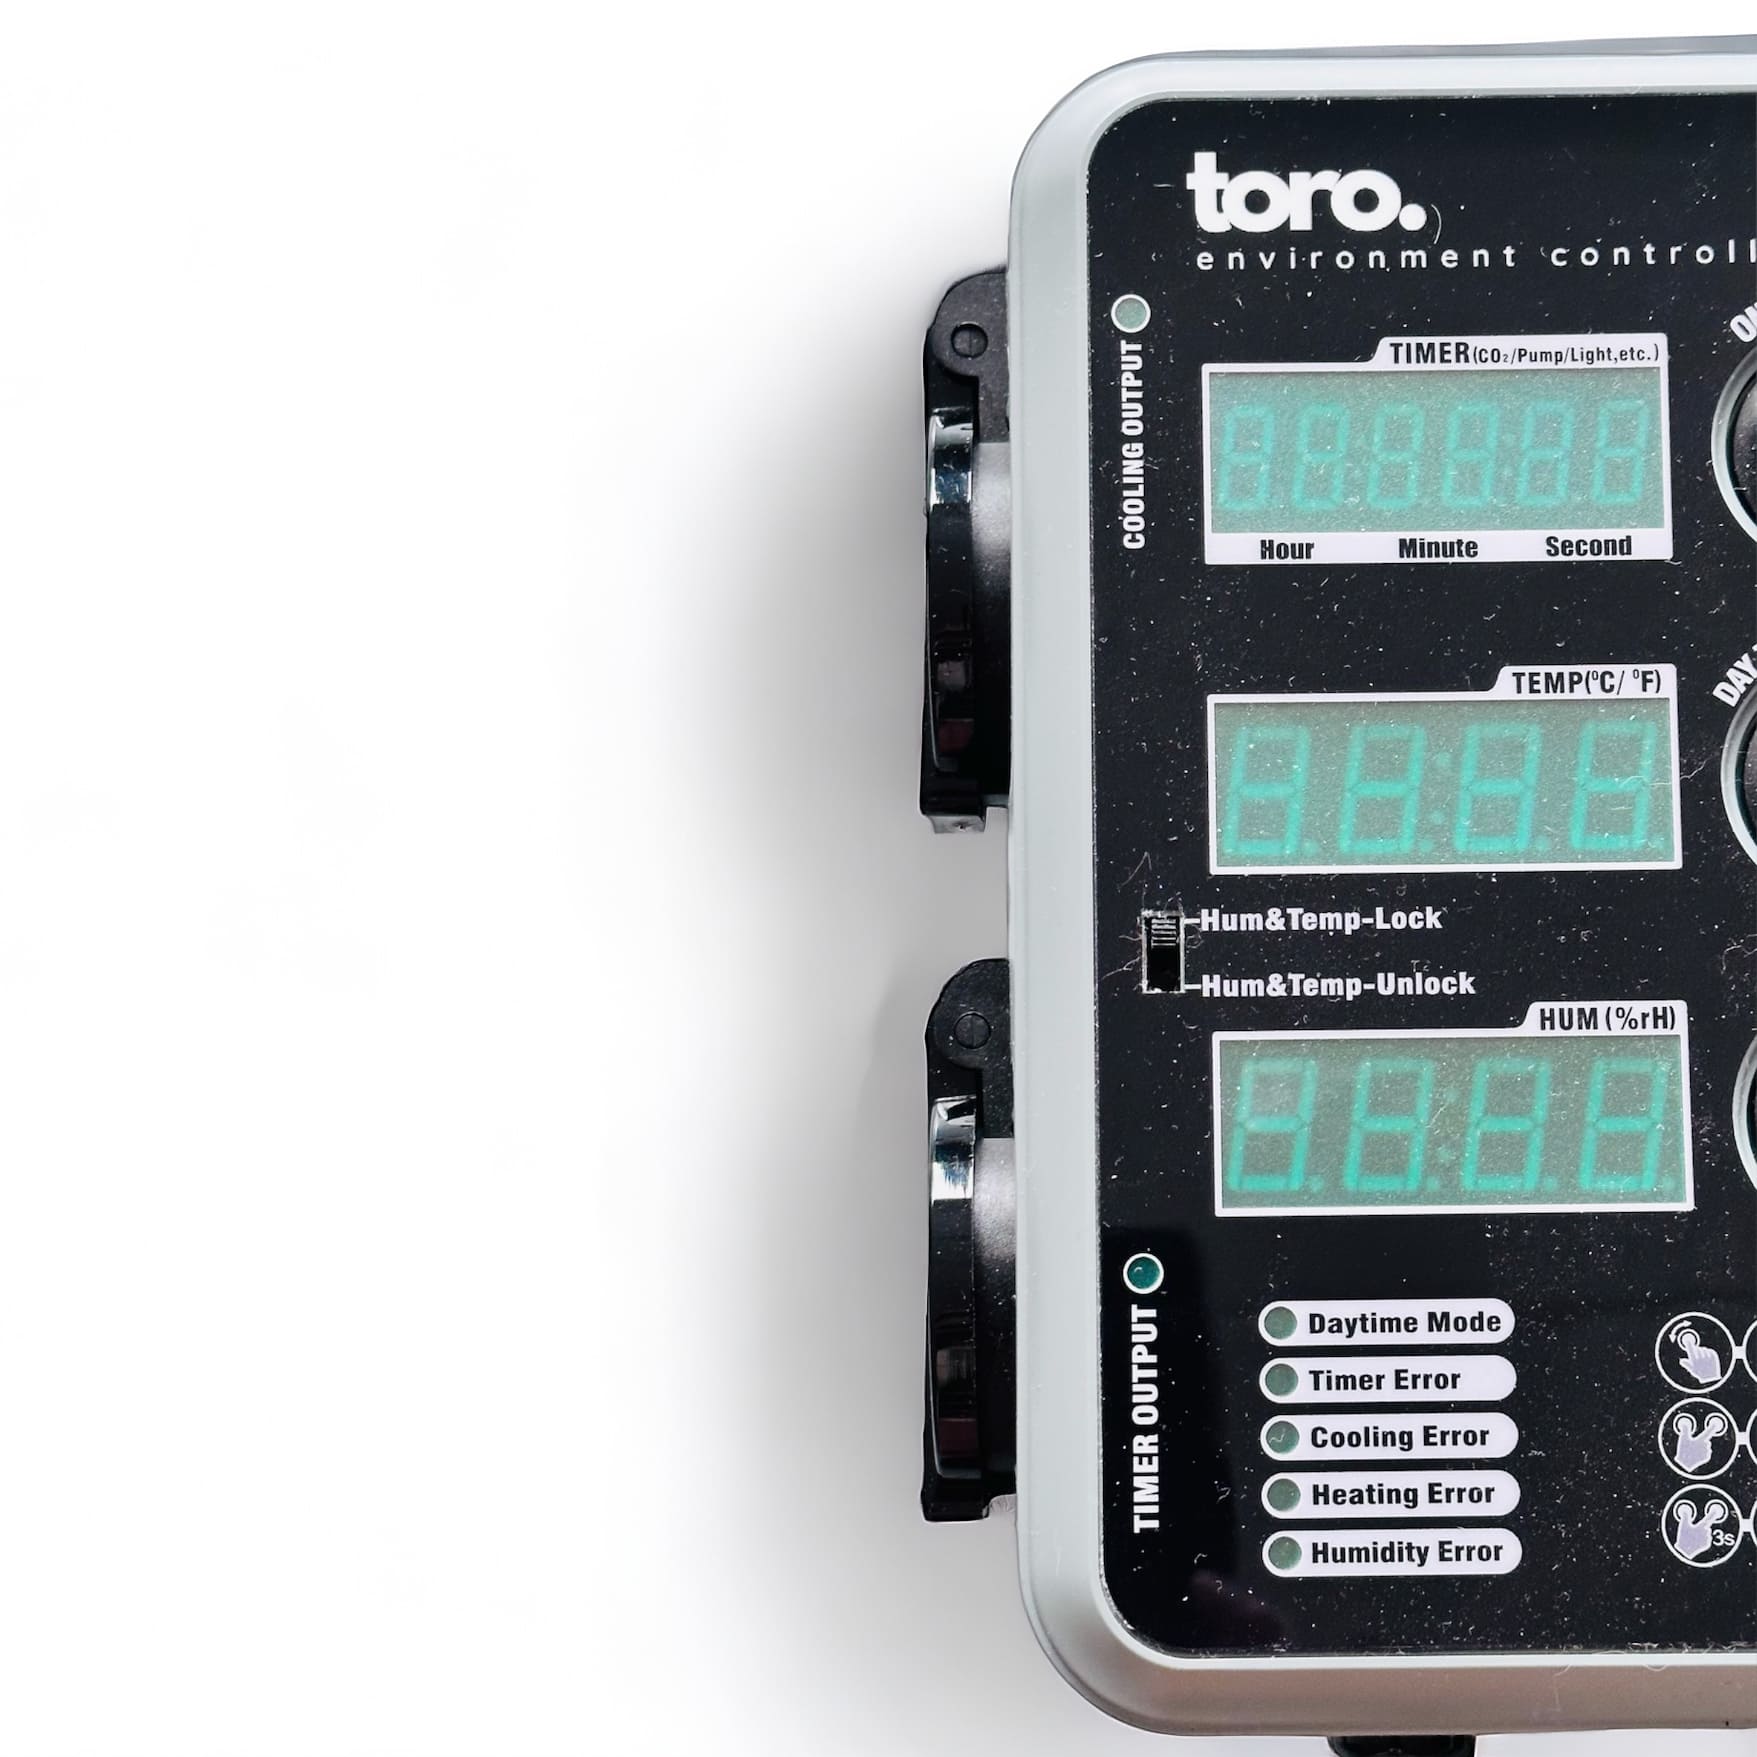 TORO day and night climate controller